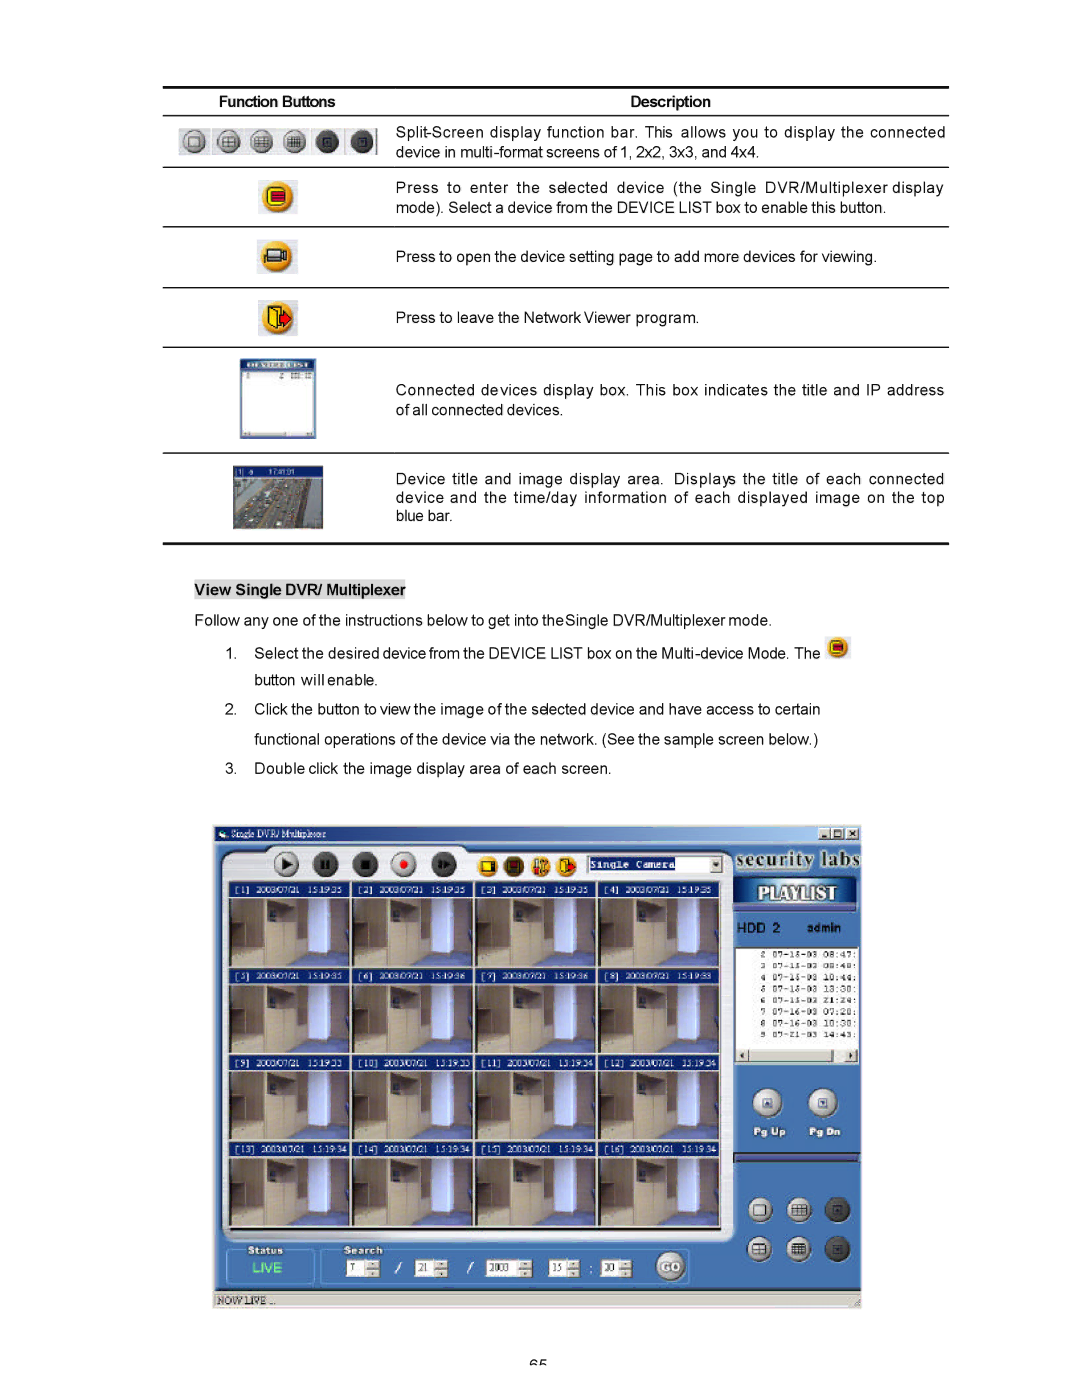 Maxtor SLD240 operation manual Function Buttons Description, View Single DVR/ Multiplexer 